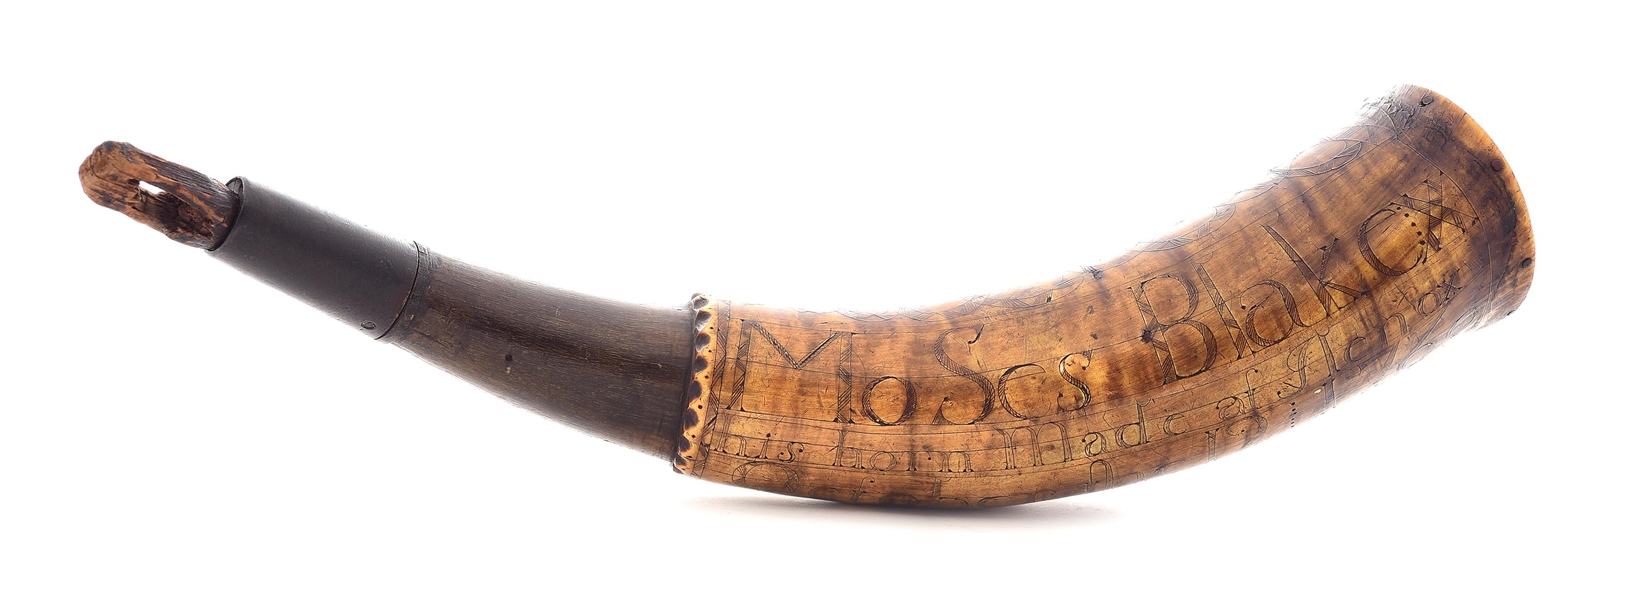 ENGRAVED 1760 DATED POWDER HORN OF MOSES BLAKE, FORT LENNOX. 